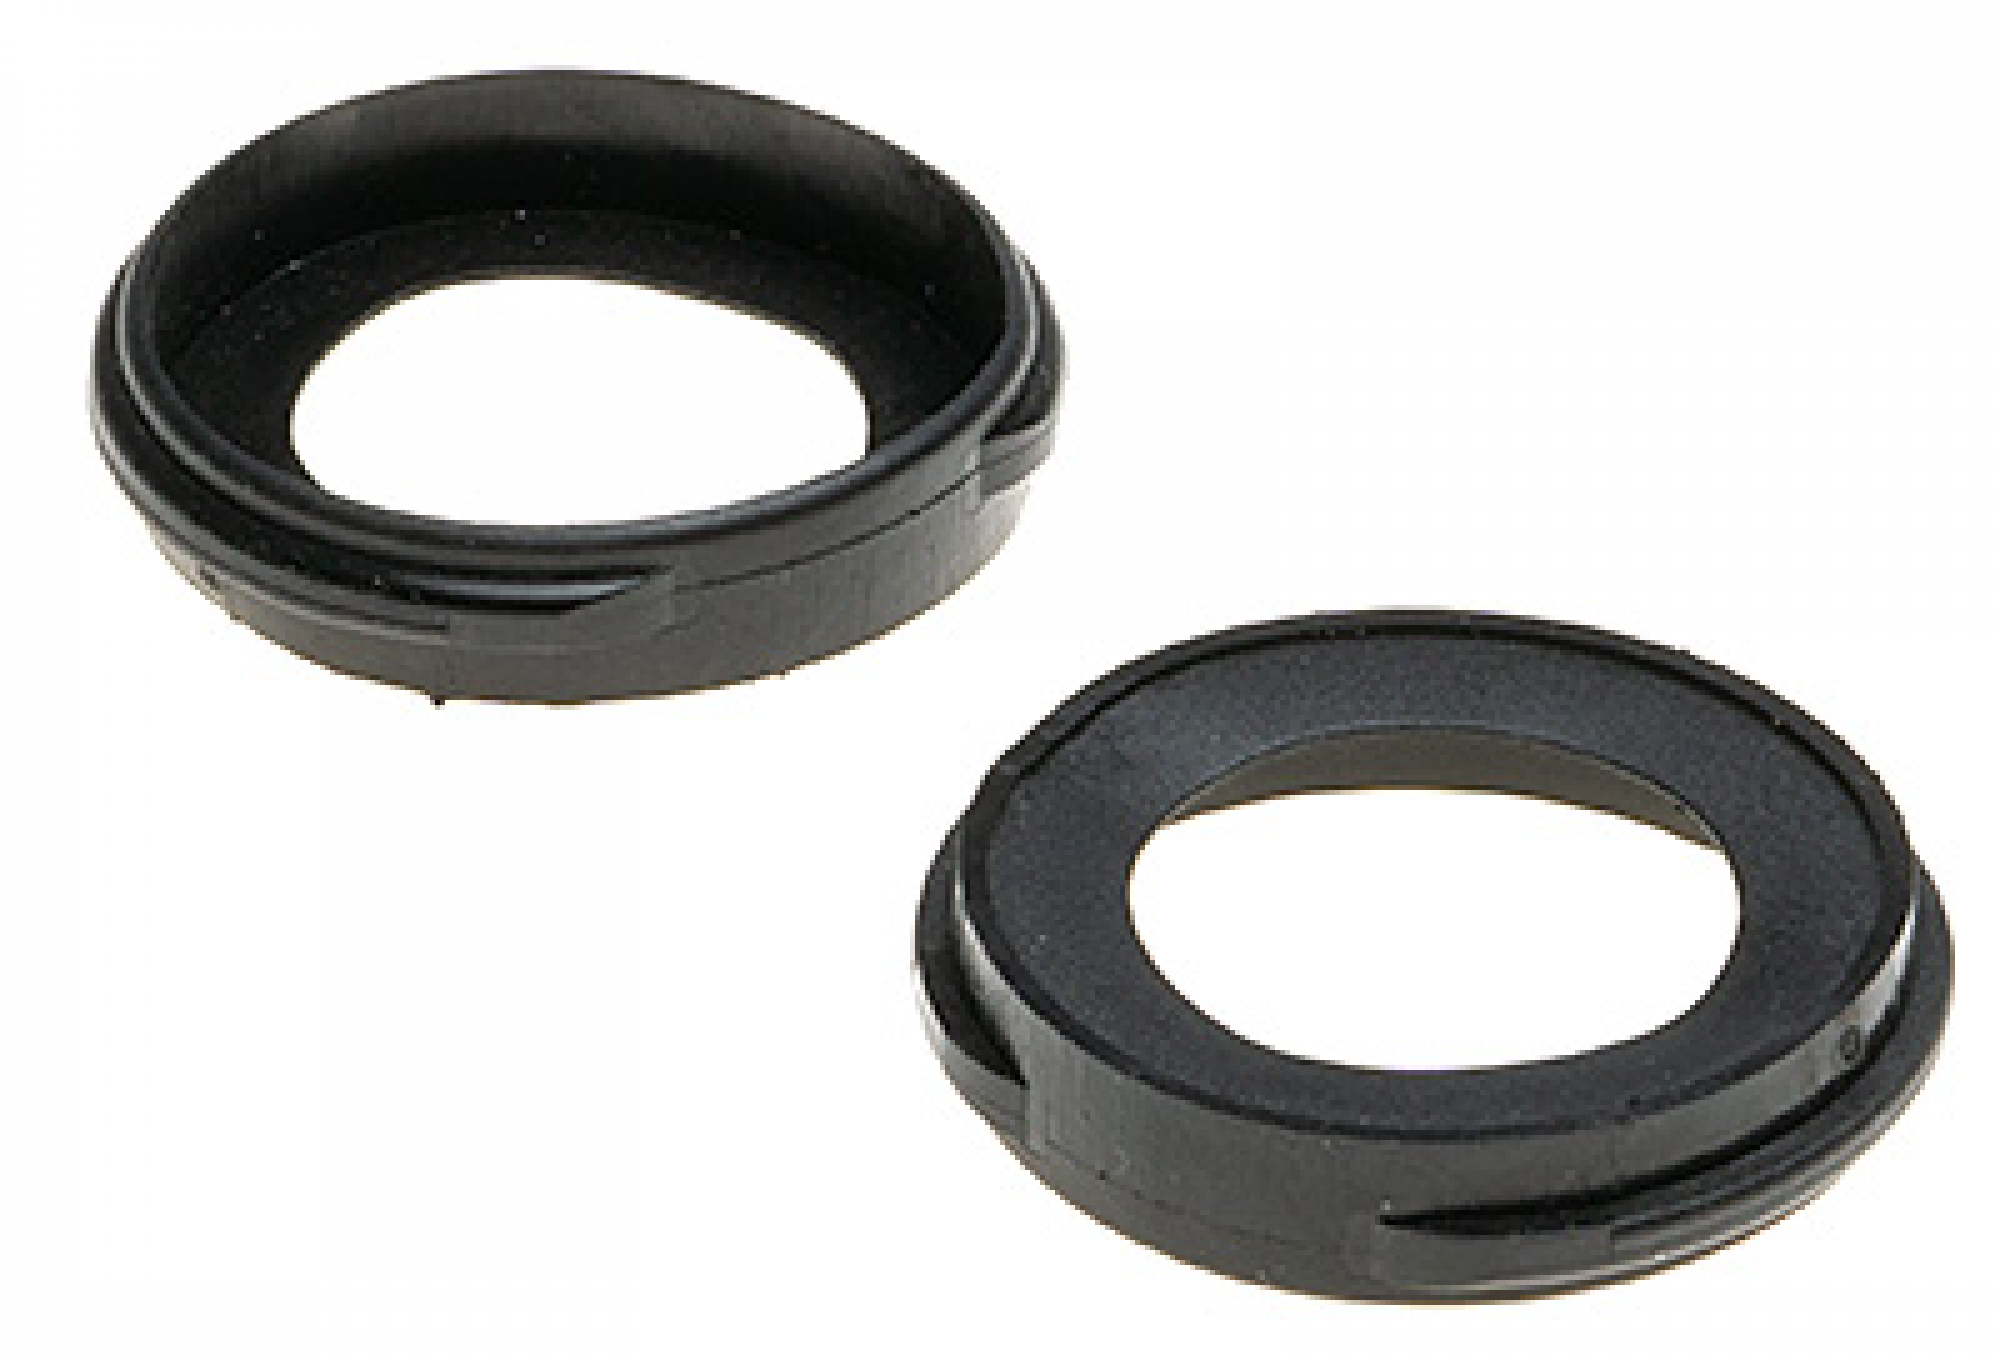 Two dirt wipers for 25 mm spindle nut